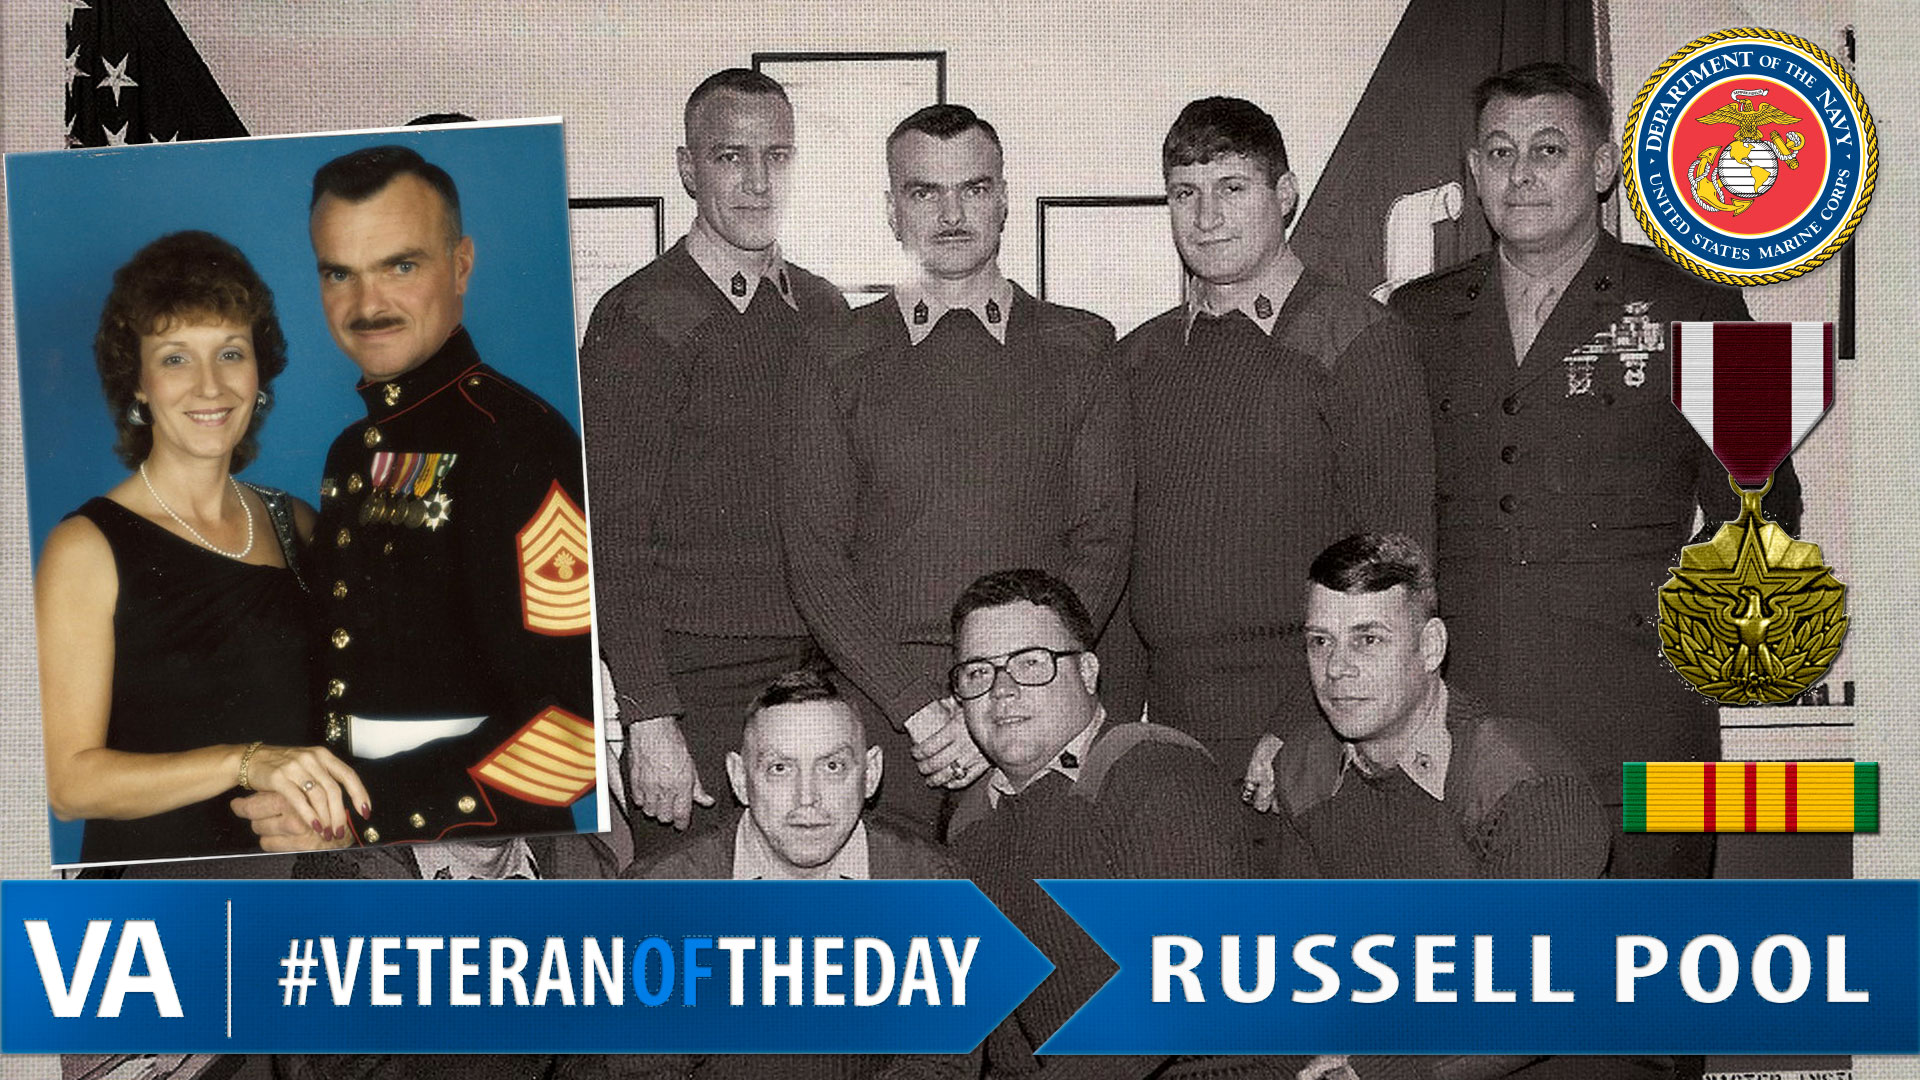 Russell Pool - Veteran of the Day